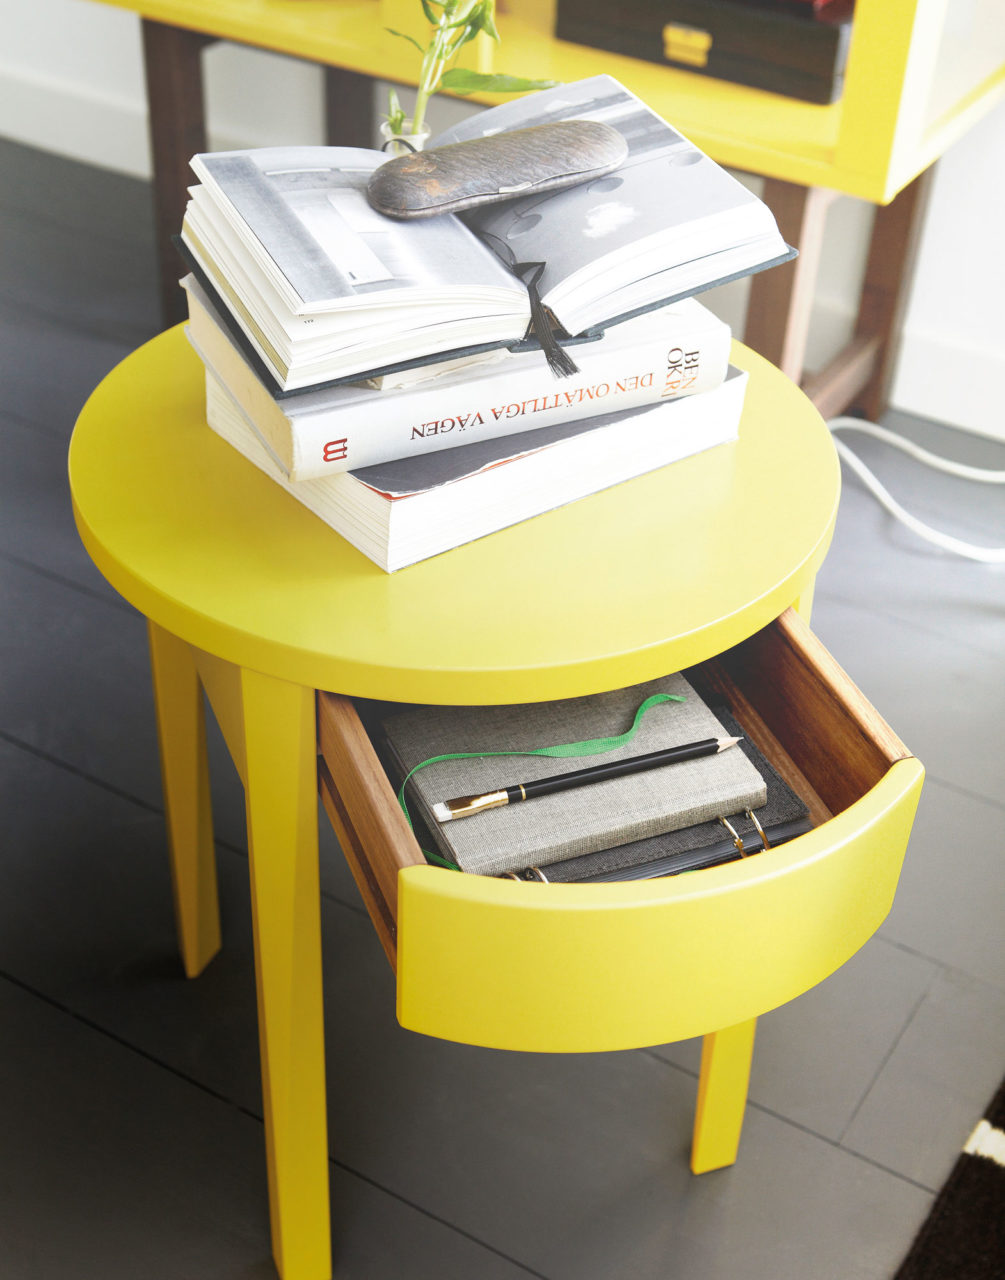 Round yellow side table with drawer, a stack of books on top.